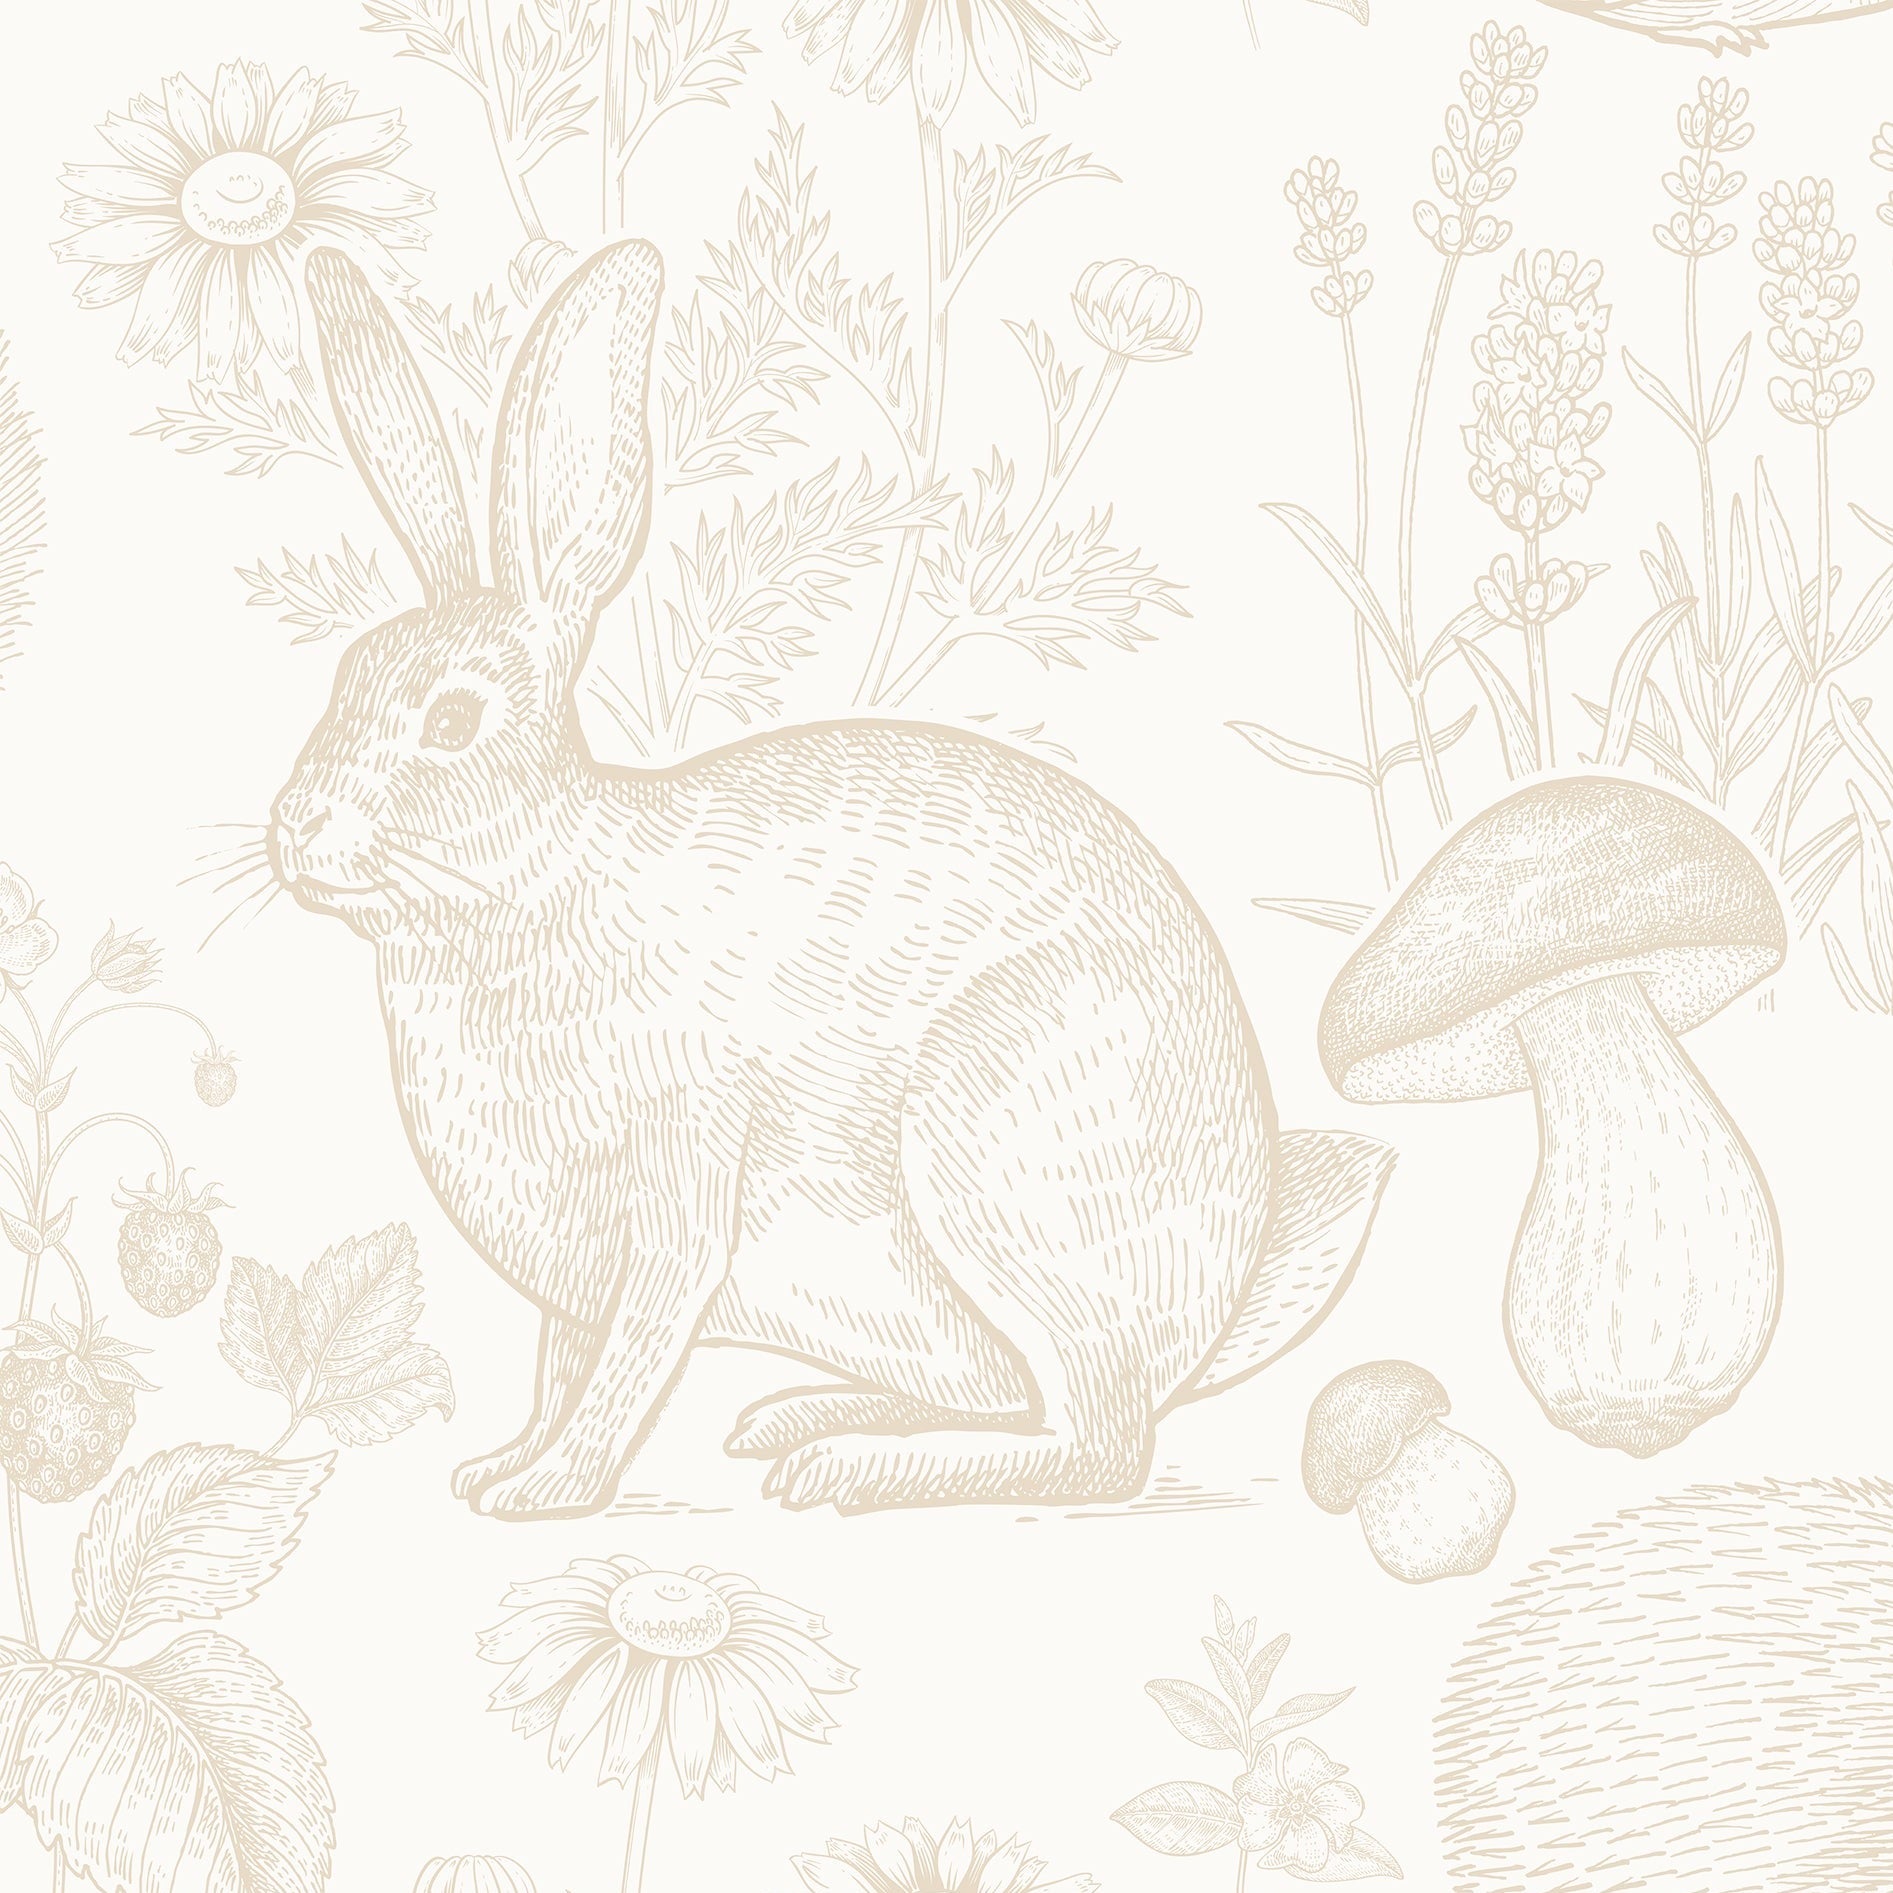 Seamless pattern of "Woodland Creatures Wallpaper" displaying a repetitive design of rabbits, hedgehogs, squirrels, mushrooms, and various plants in sepia tones on an off-white background, offering a rustic and enchanting ambiance to a room.